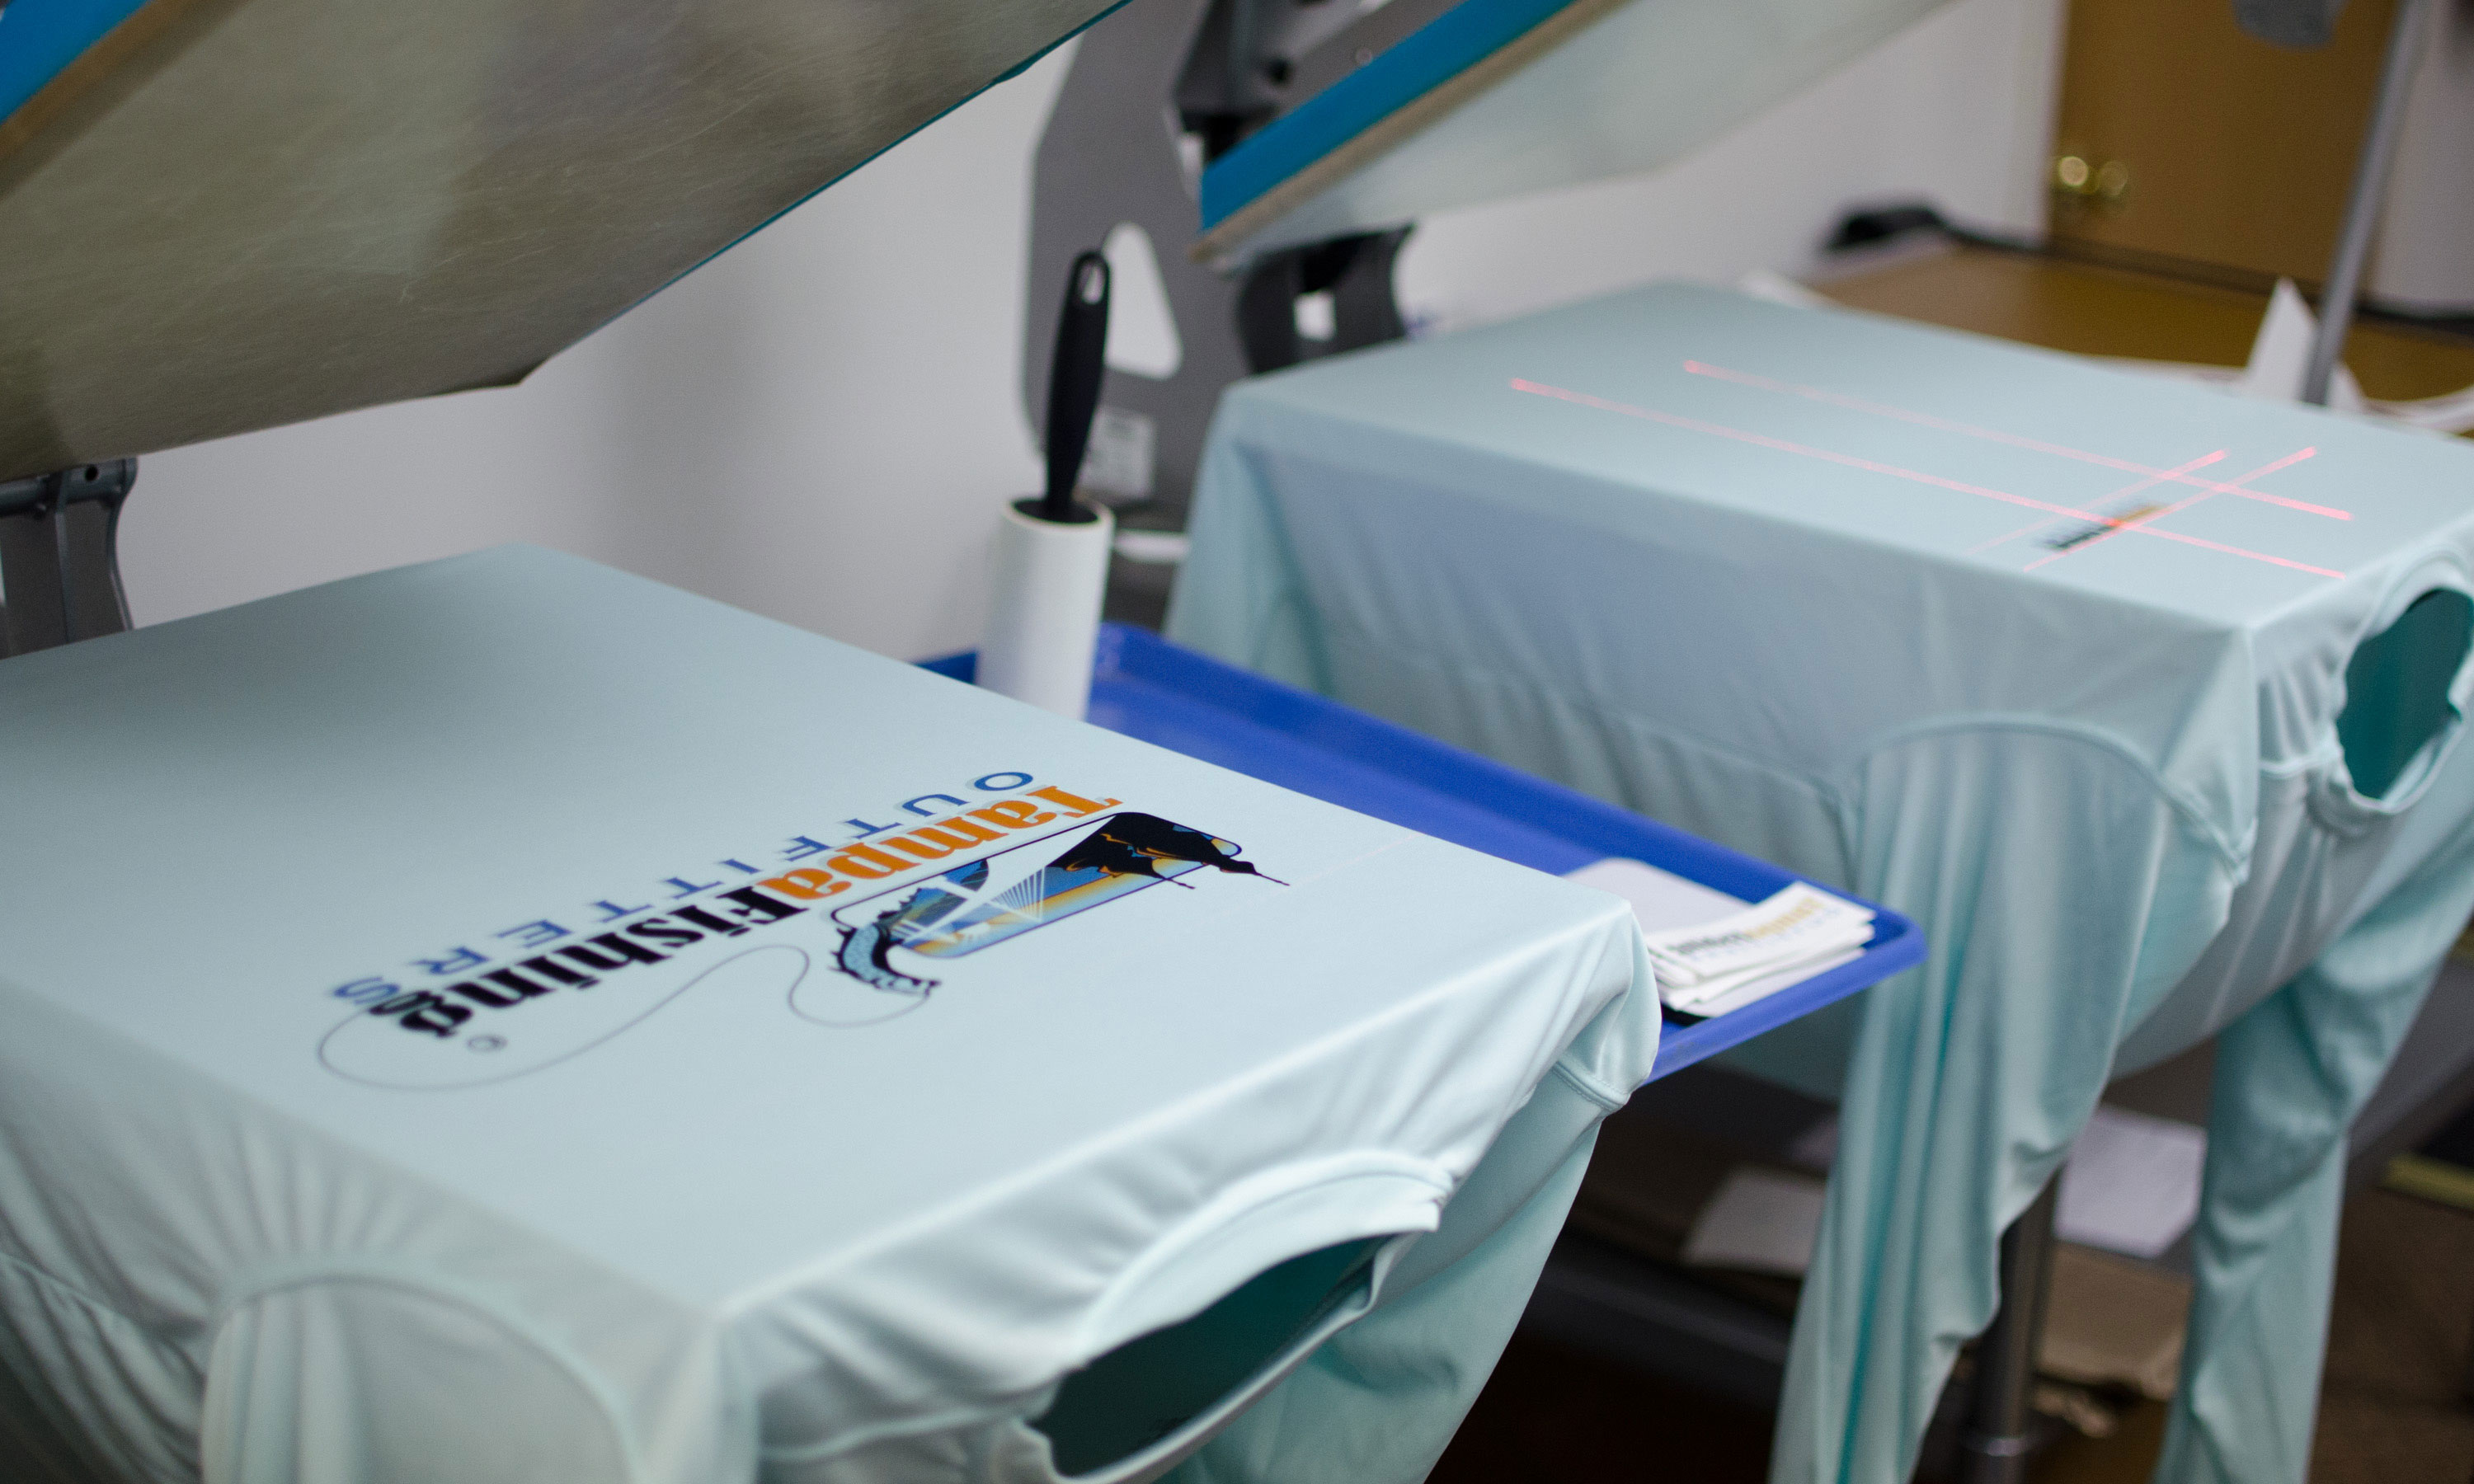 Shirts on a heatpress after sublimation printing